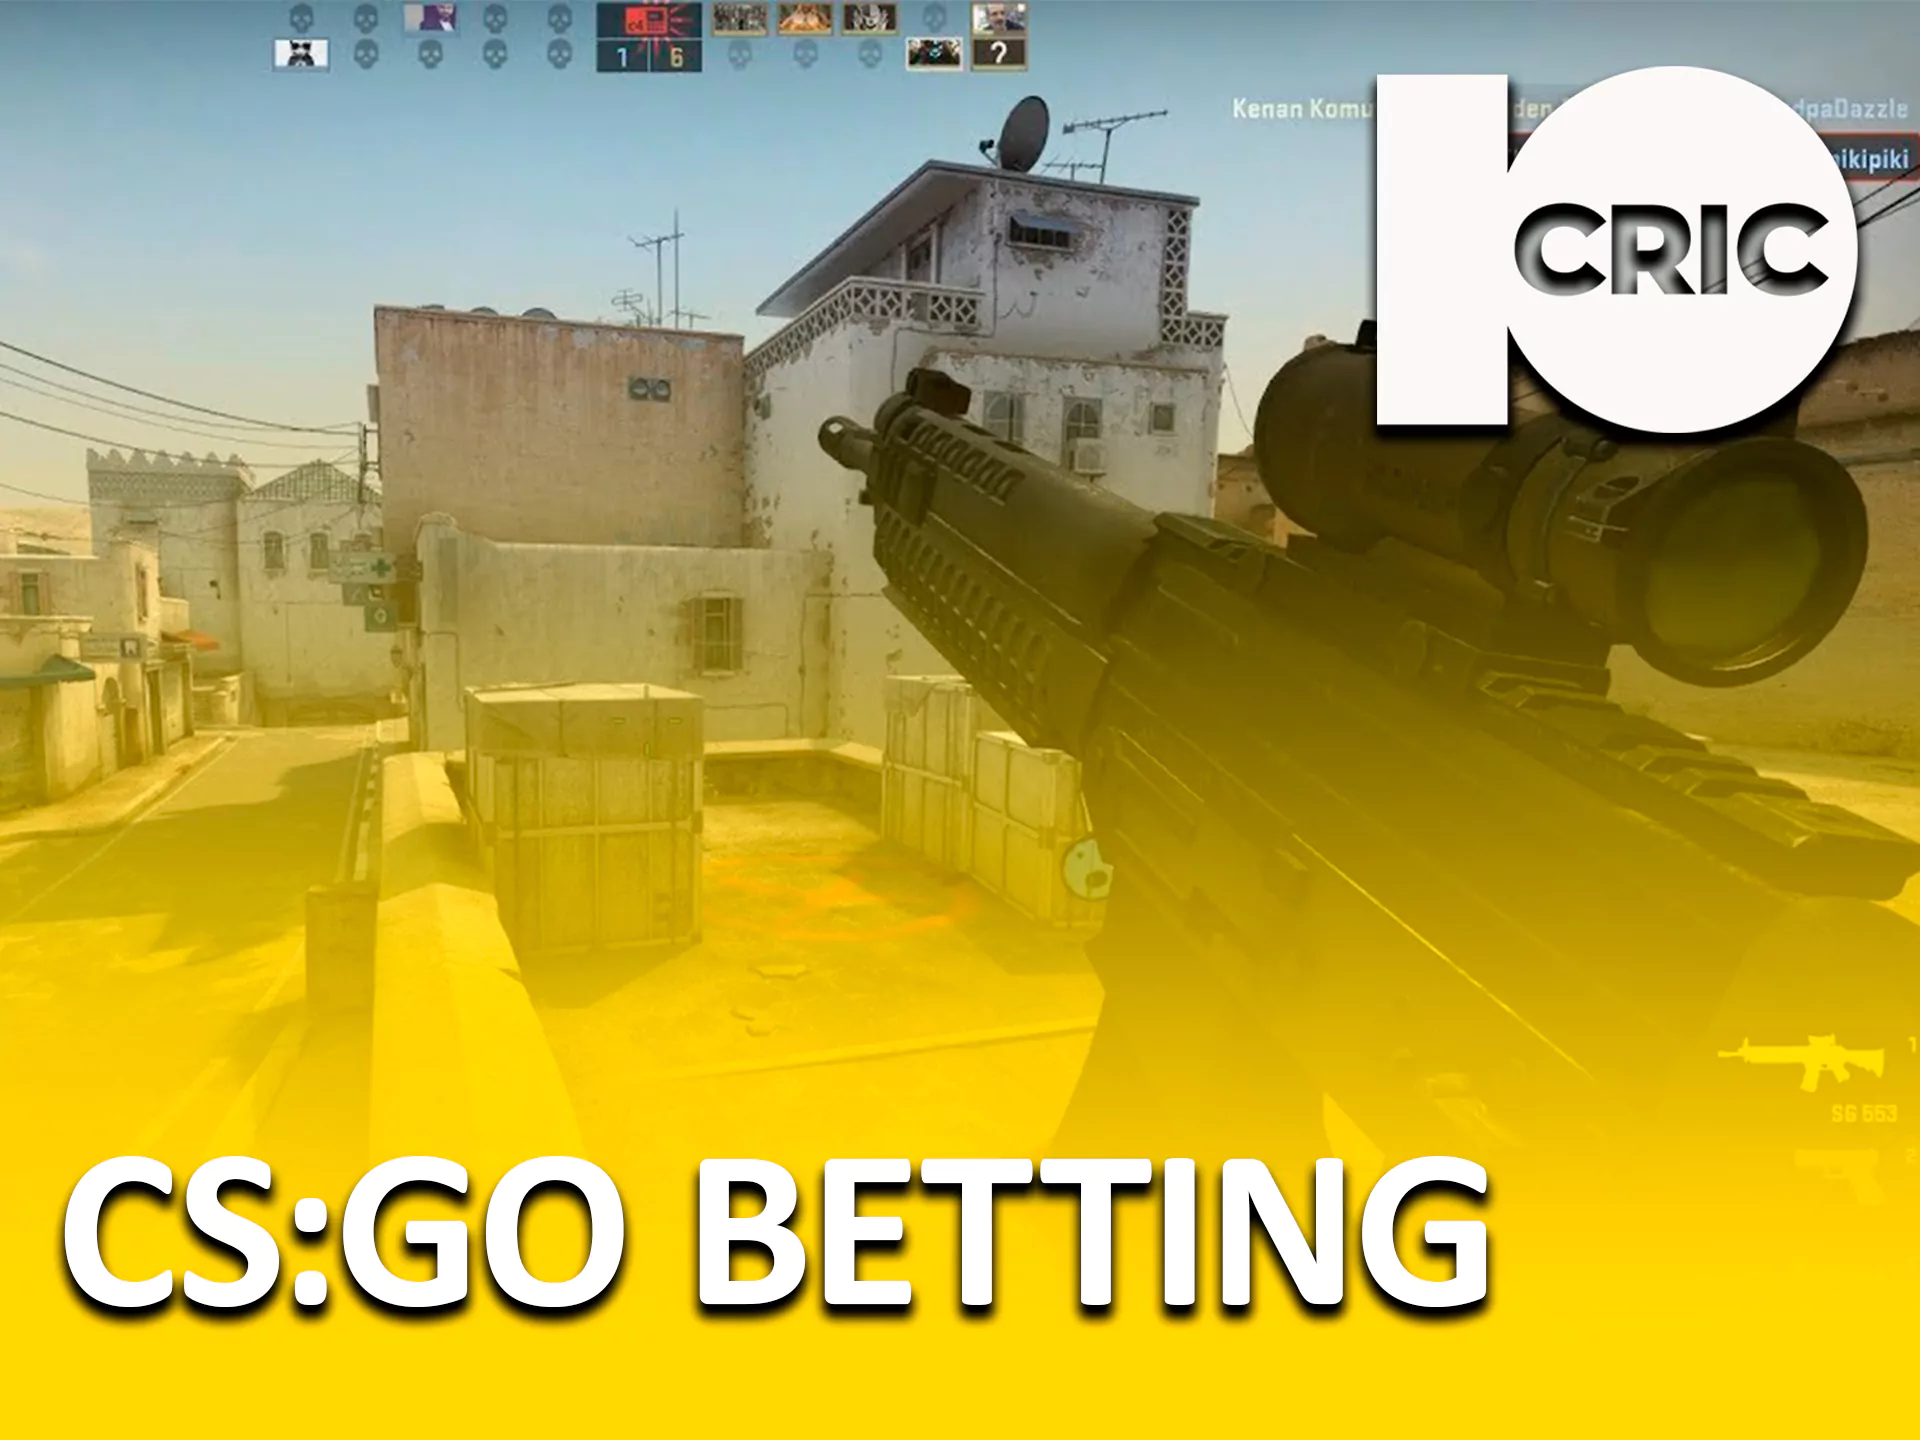 Watch CS:GO streamings and place bets.